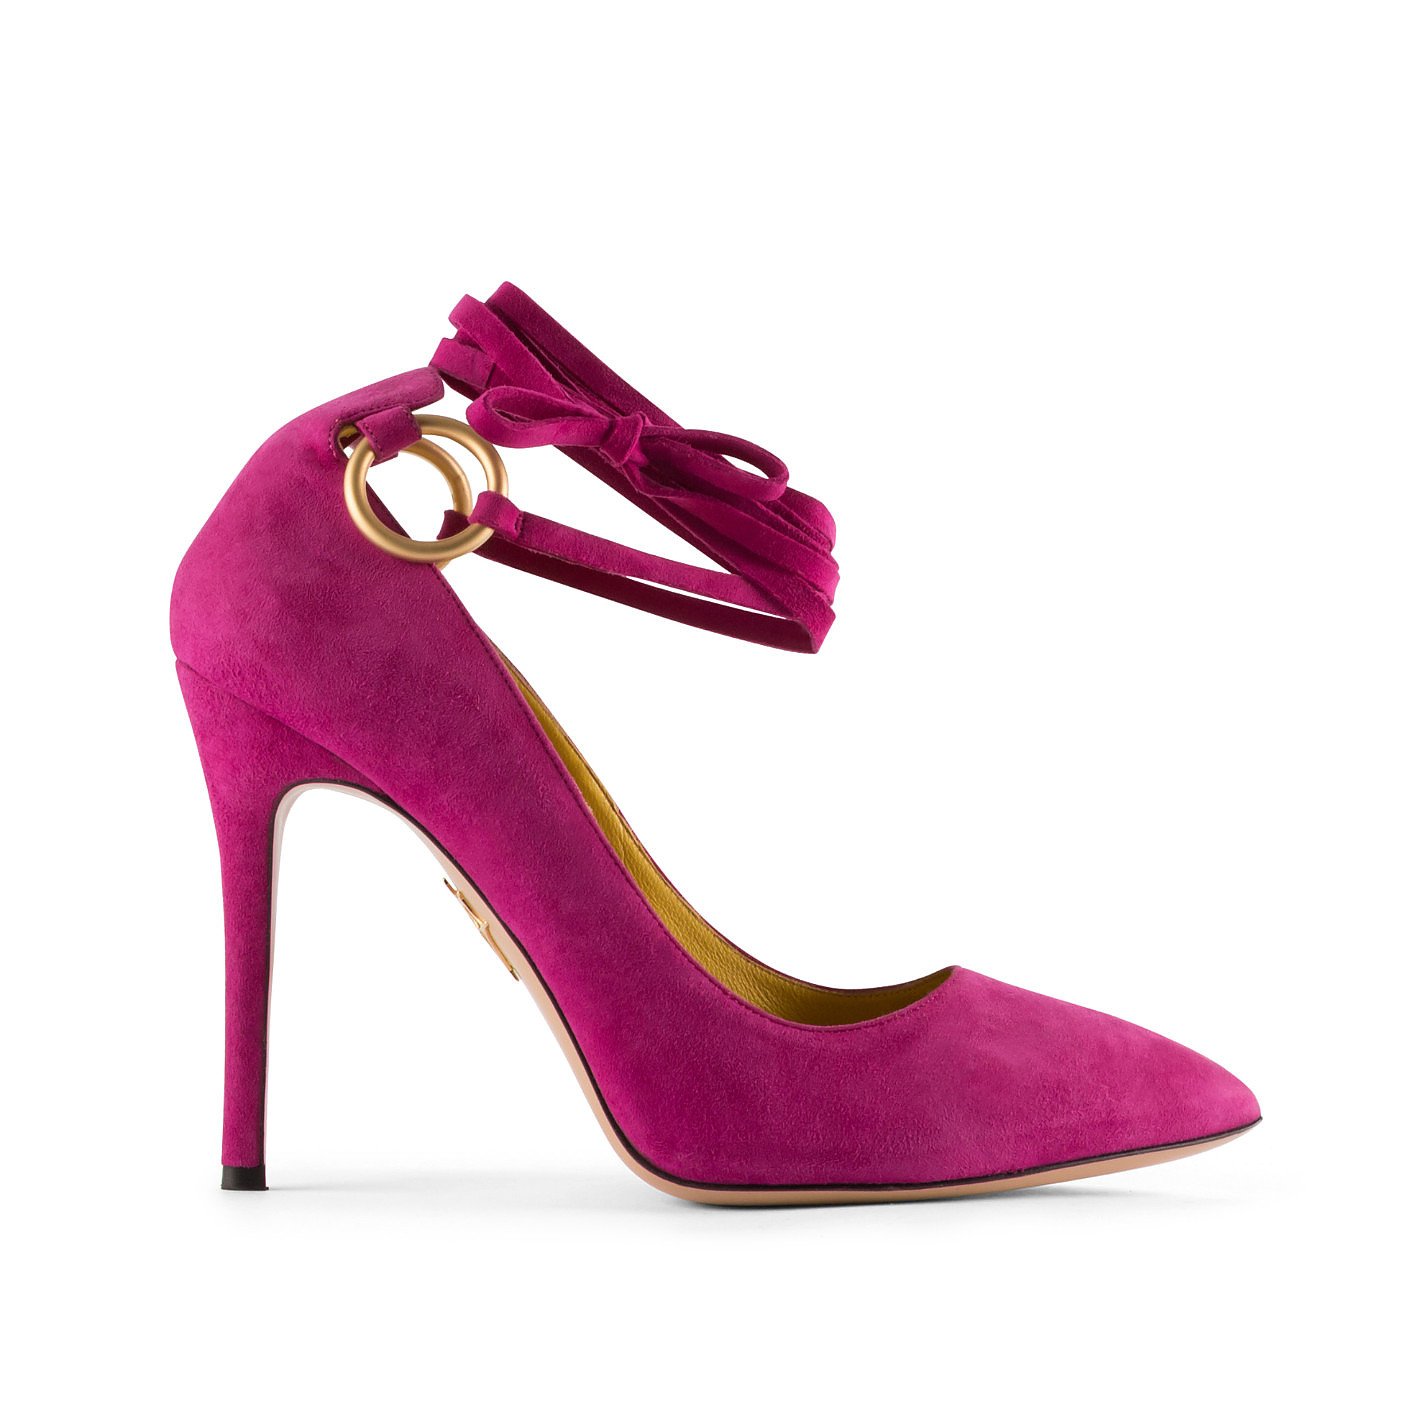 Charlotte Olympia Sabine Suede Wrap Pumps